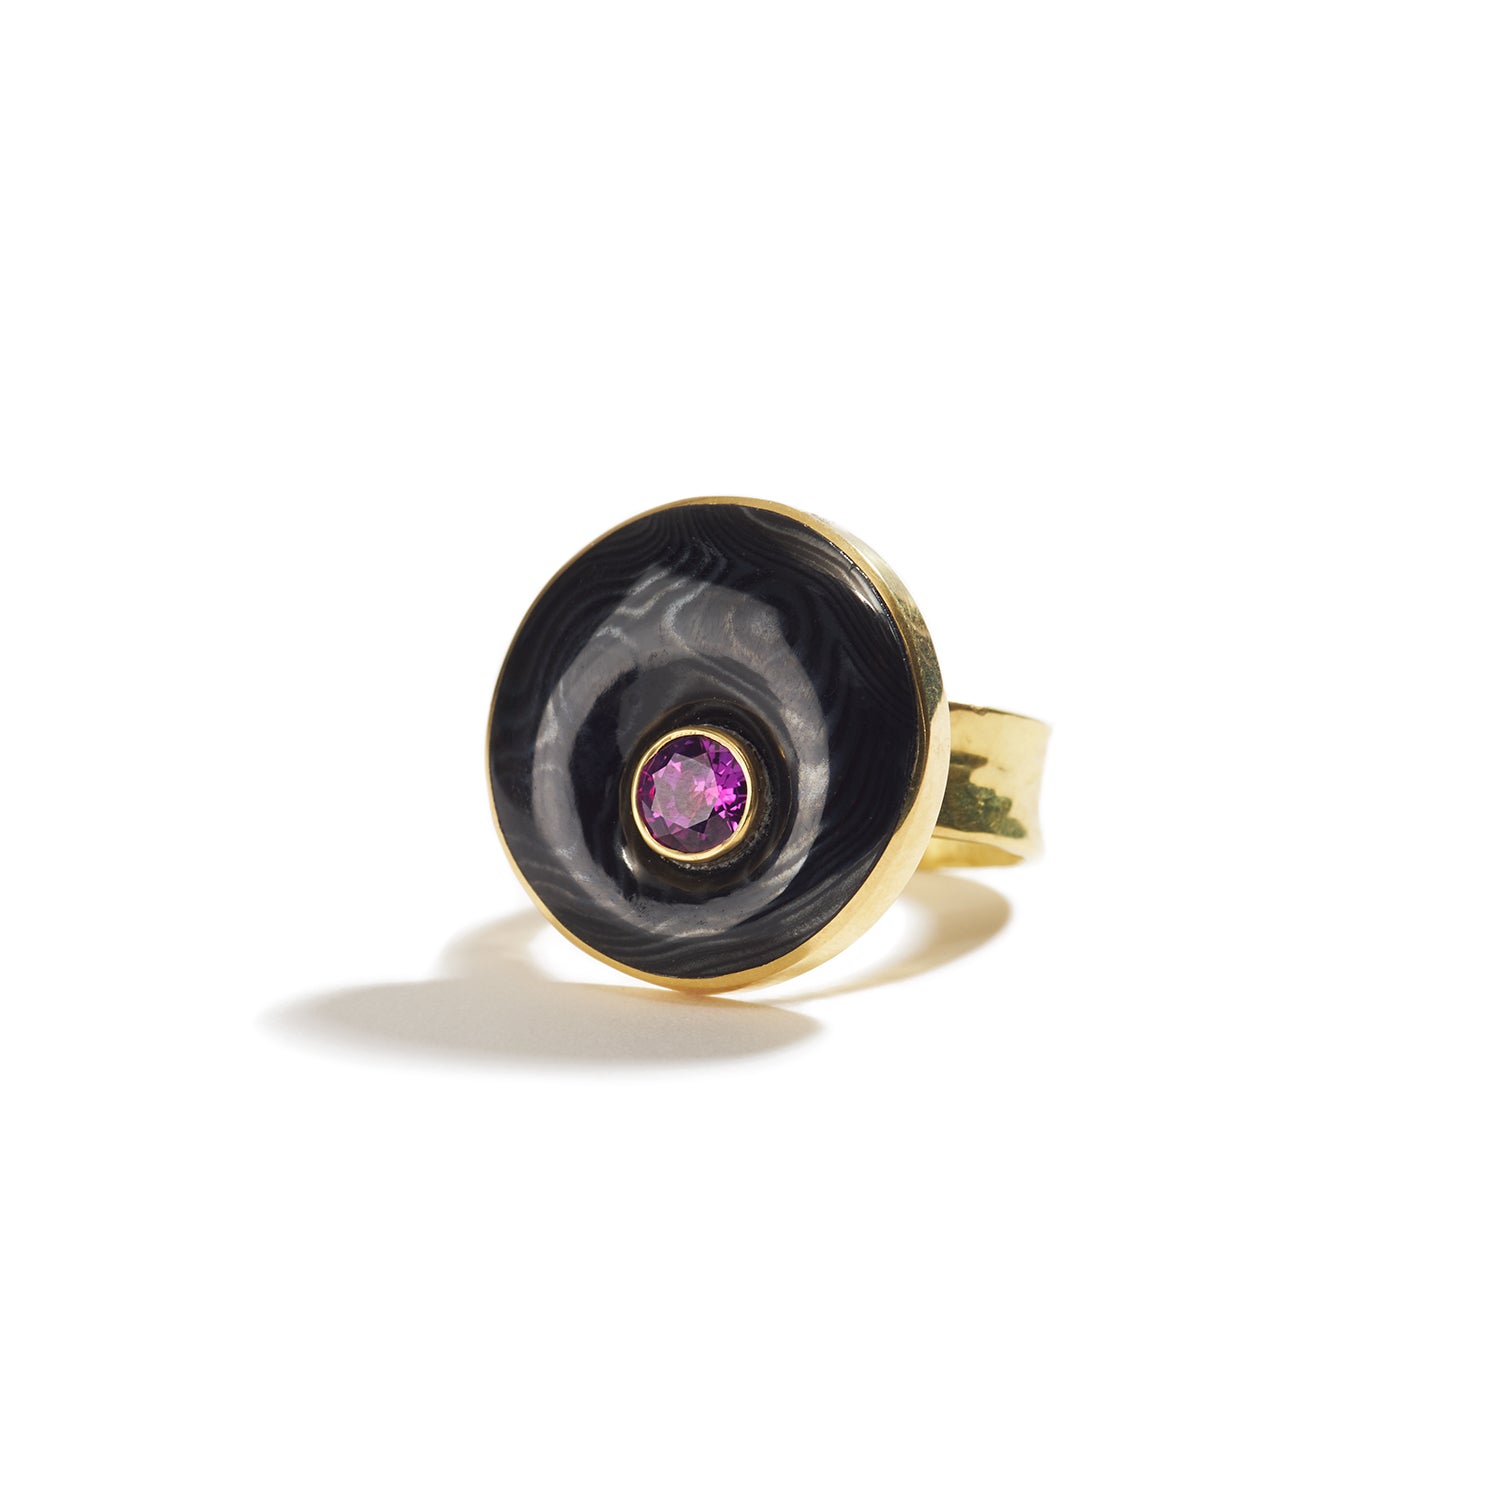 carved psilomelene and a hot pink sapphire set in yellow gold